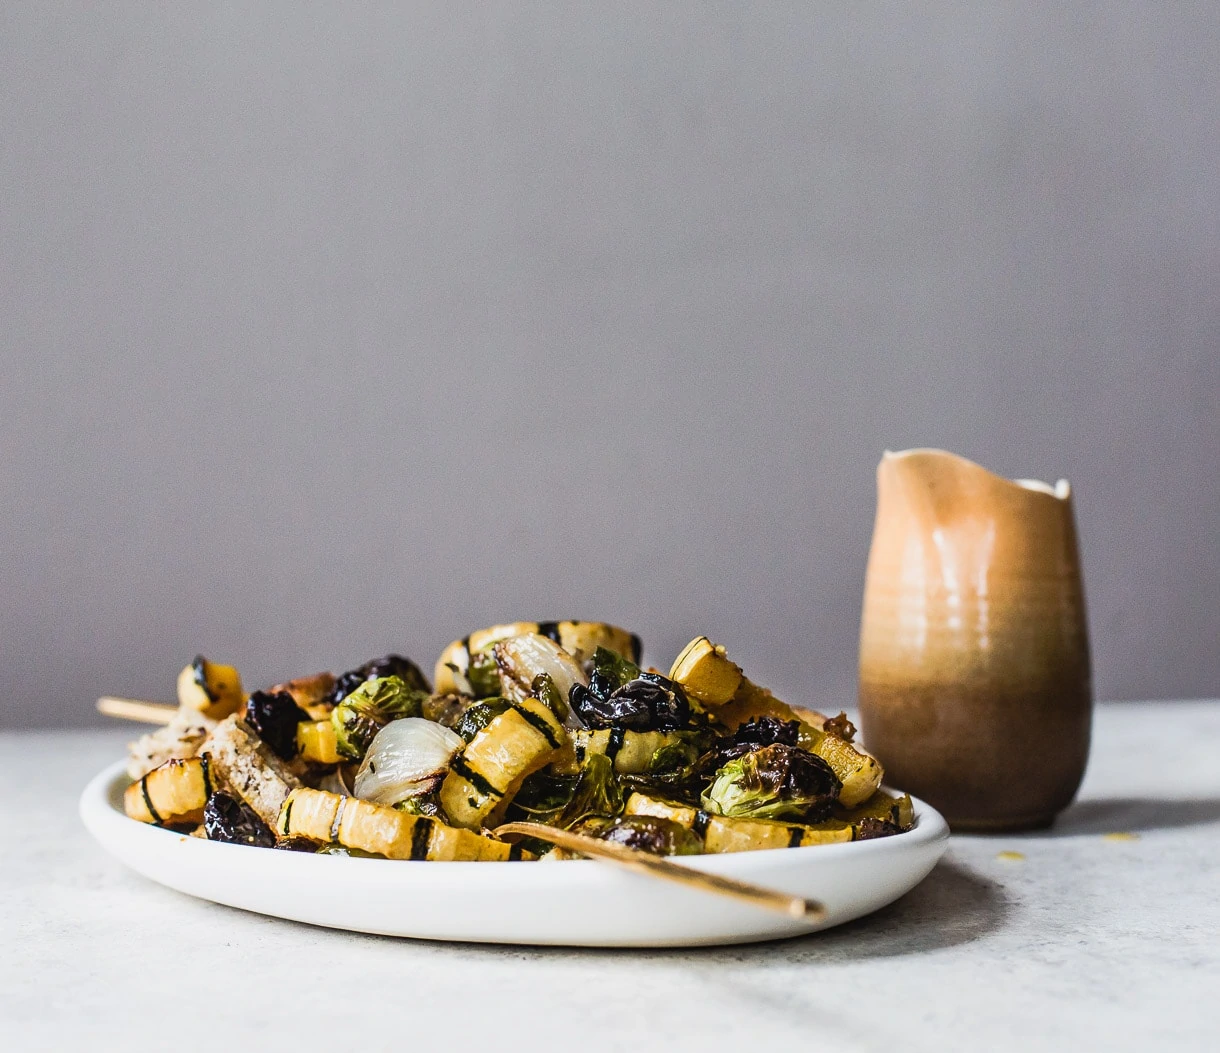 Vegetarian Sheet Pan Stuffing with squash, brussels sprouts, and dried tart cherries